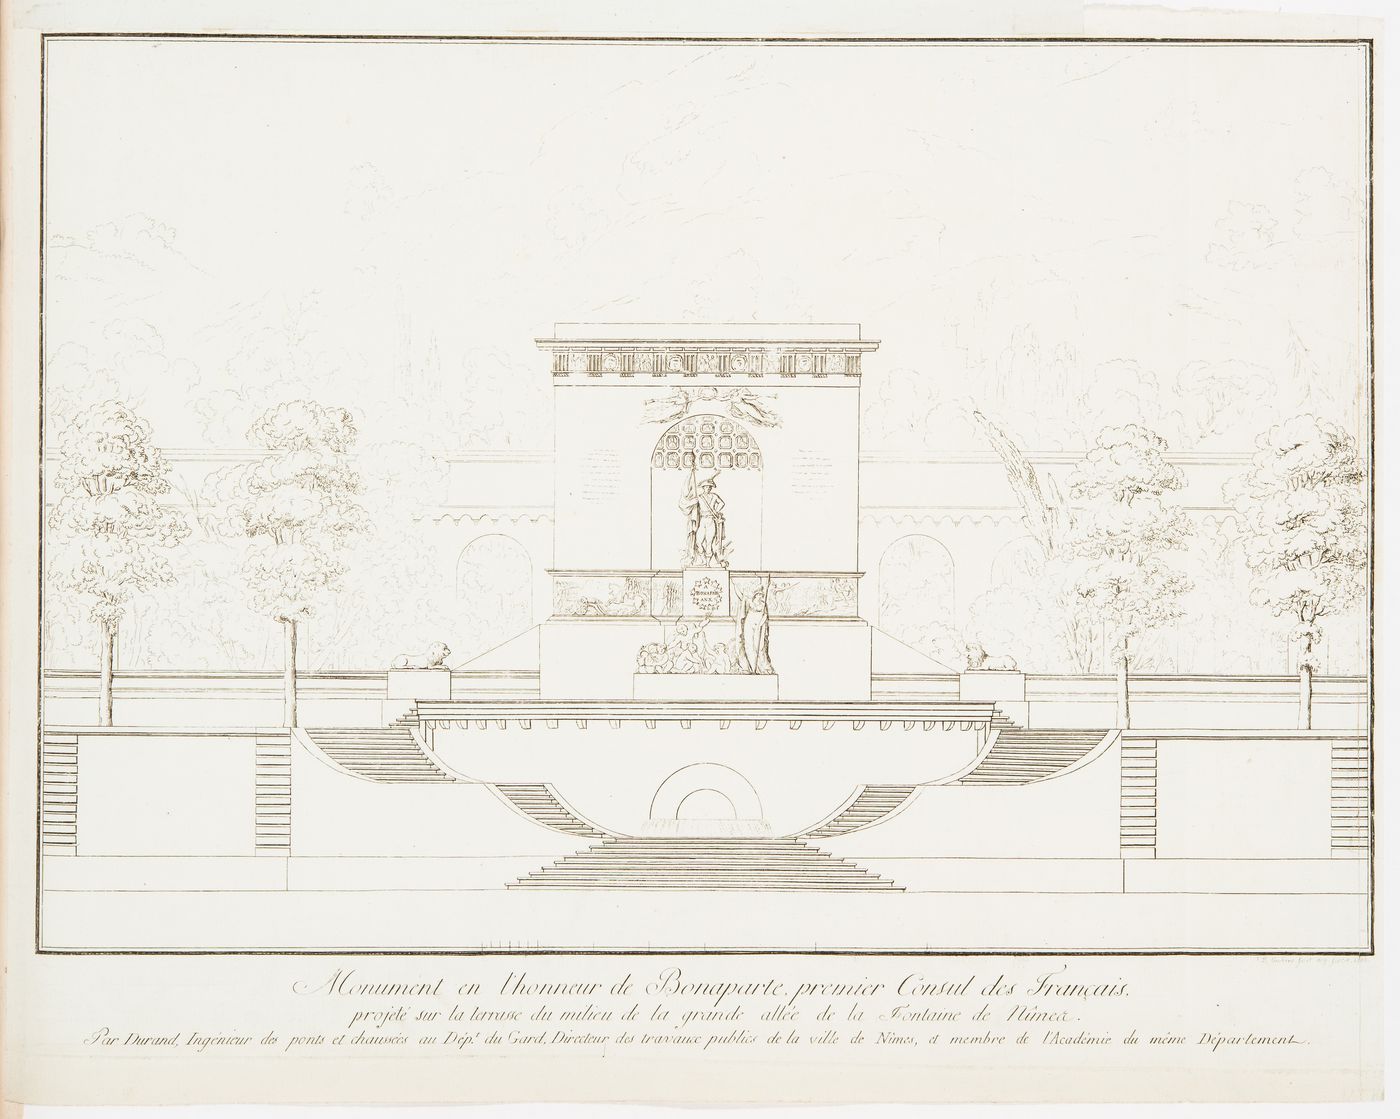 Design by Charles-Étienne Durand for a monument in honour of Bonaparte, First Consul of France, Nîmes: Elevation